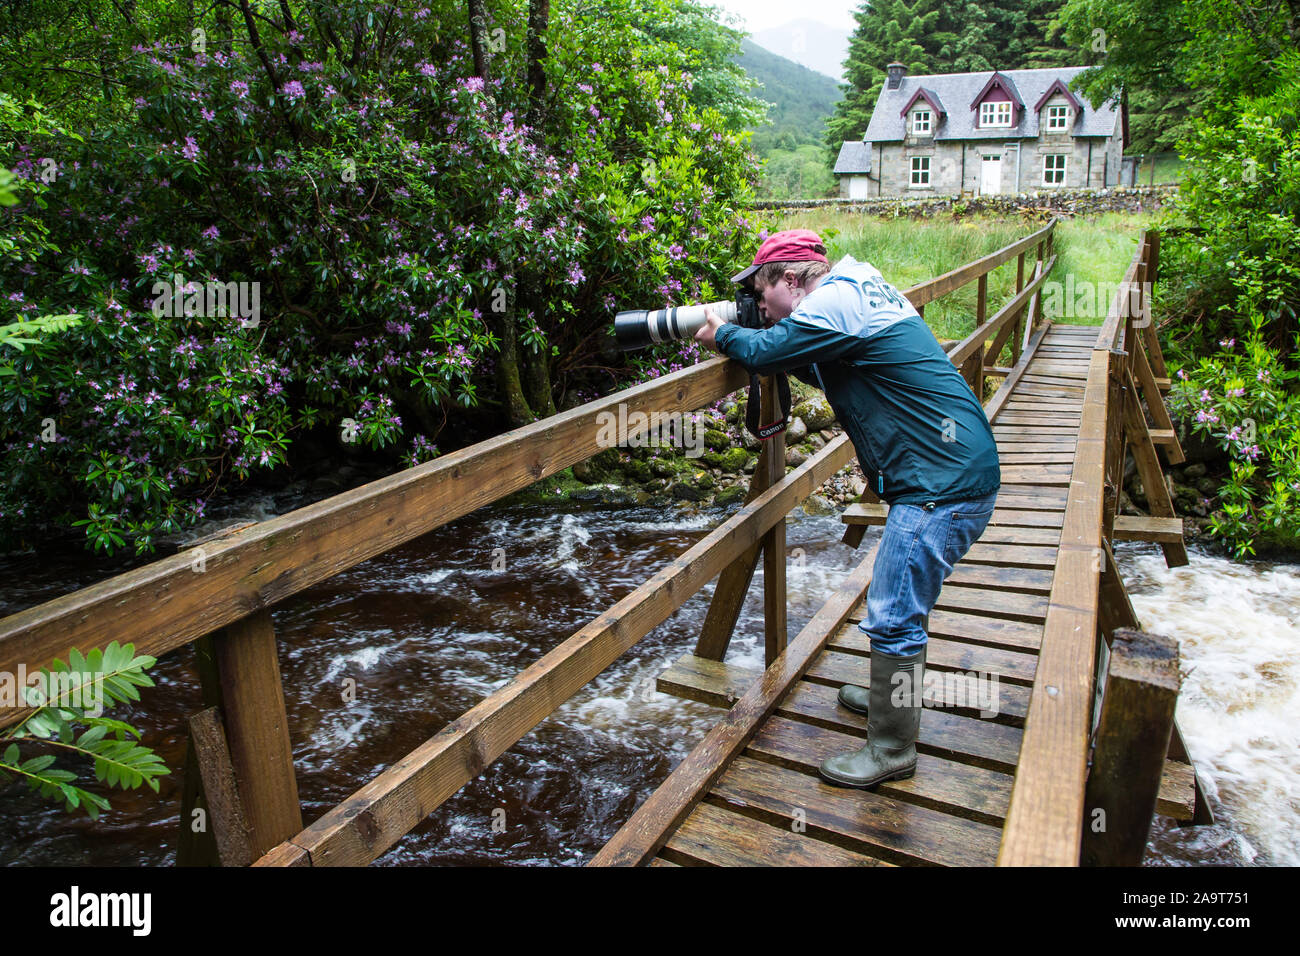 Oliver Hellowell Photographer with Down Syndrome in Glen Etive, Scotland, UK Stock Photo